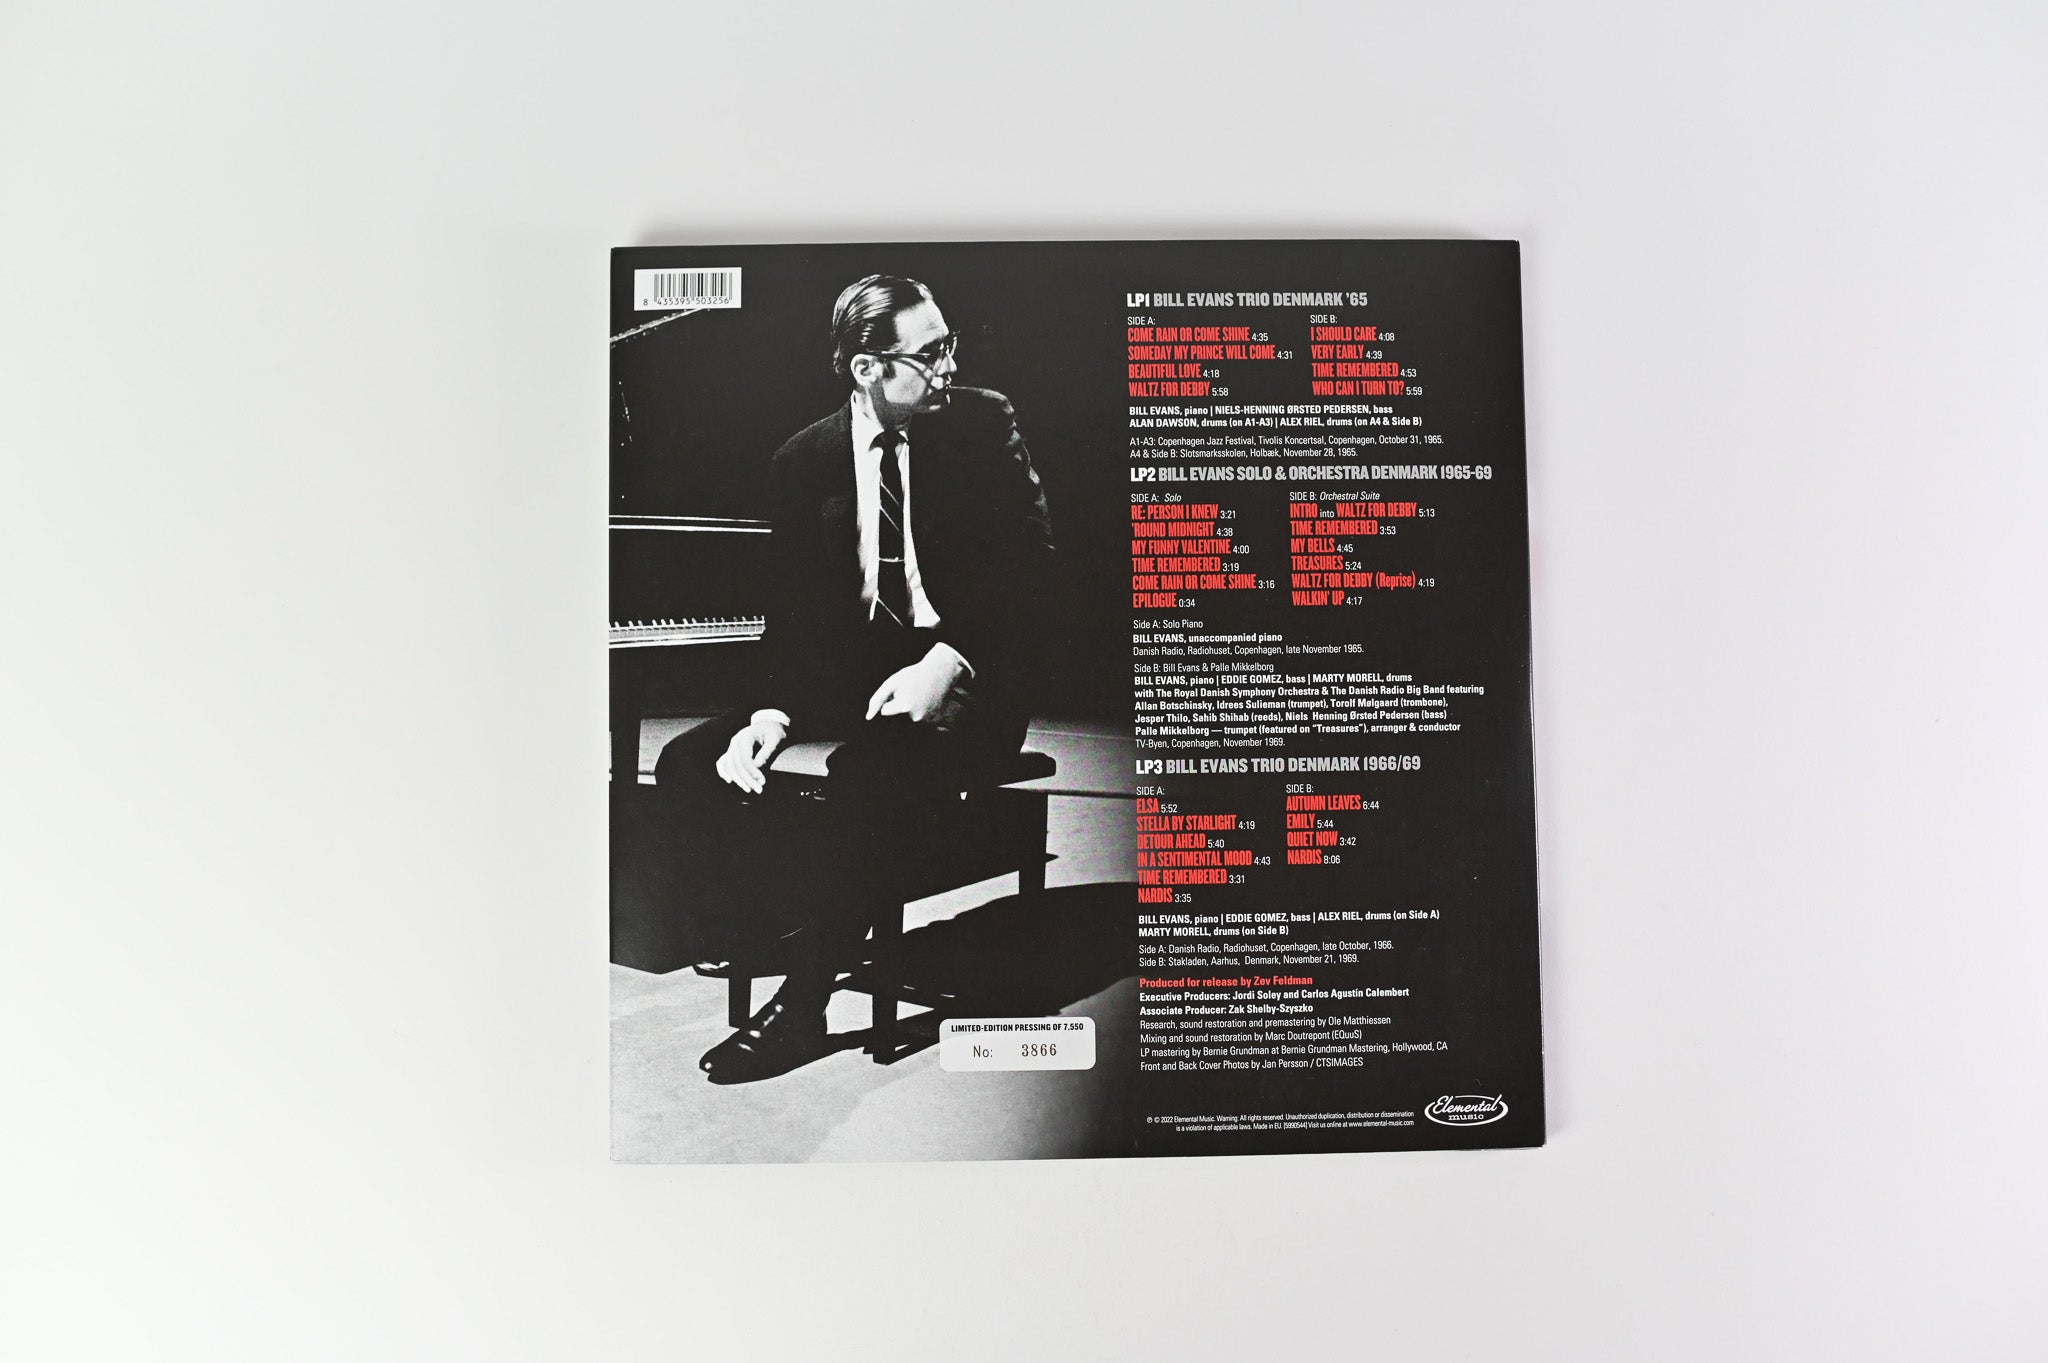 Bill Evans - Treasures (Solo, Trio & Orchestra Recordings From Denmark (1965-1969)) on Elemental Ltd Numbered RSD